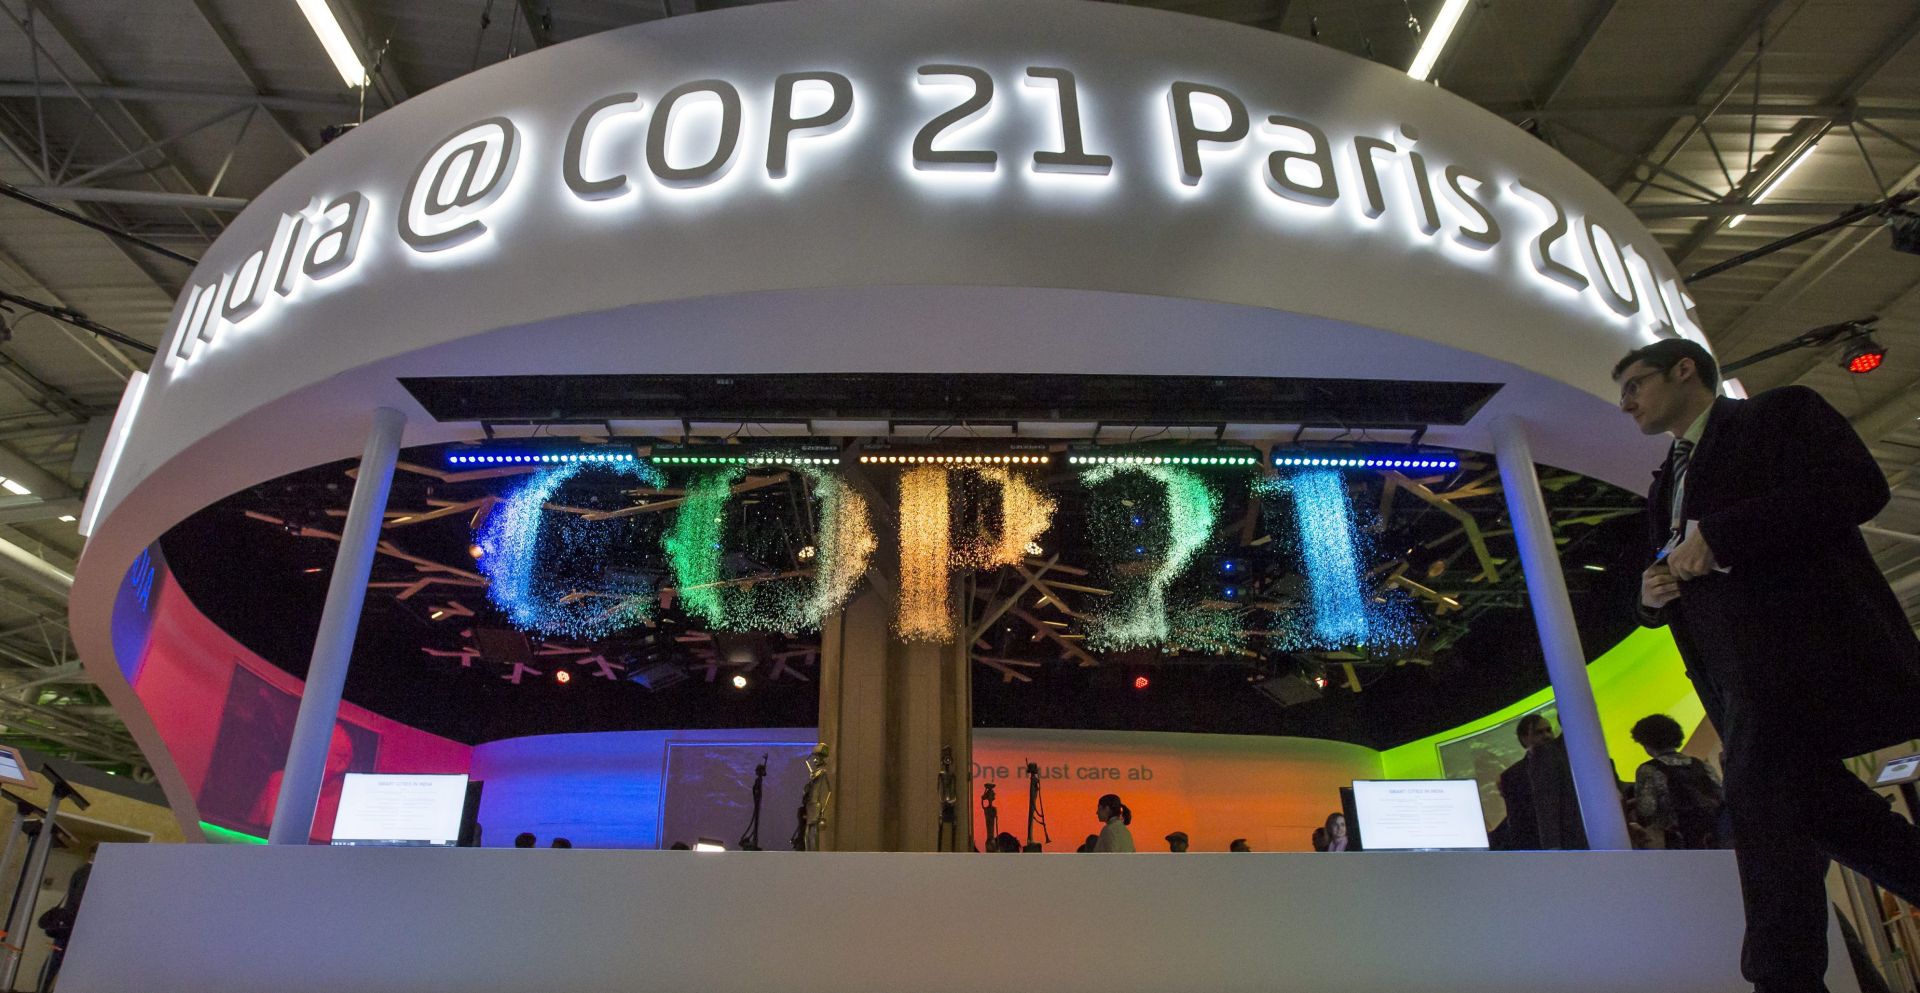 epa05053161 A visitor walks past a fountain installation which forms the word 'COP21' during the COP21 World Climate Change Conference 2015 in Le Bourget, north of Paris, France, 03 December 2015. The 21st Conference of the Parties (COP21) is held in Paris from 30 November to 11 December aimed at reaching an international agreement to limit greenhouse gas emissions and curtail climate change.  EPA/IAN LANGSDON